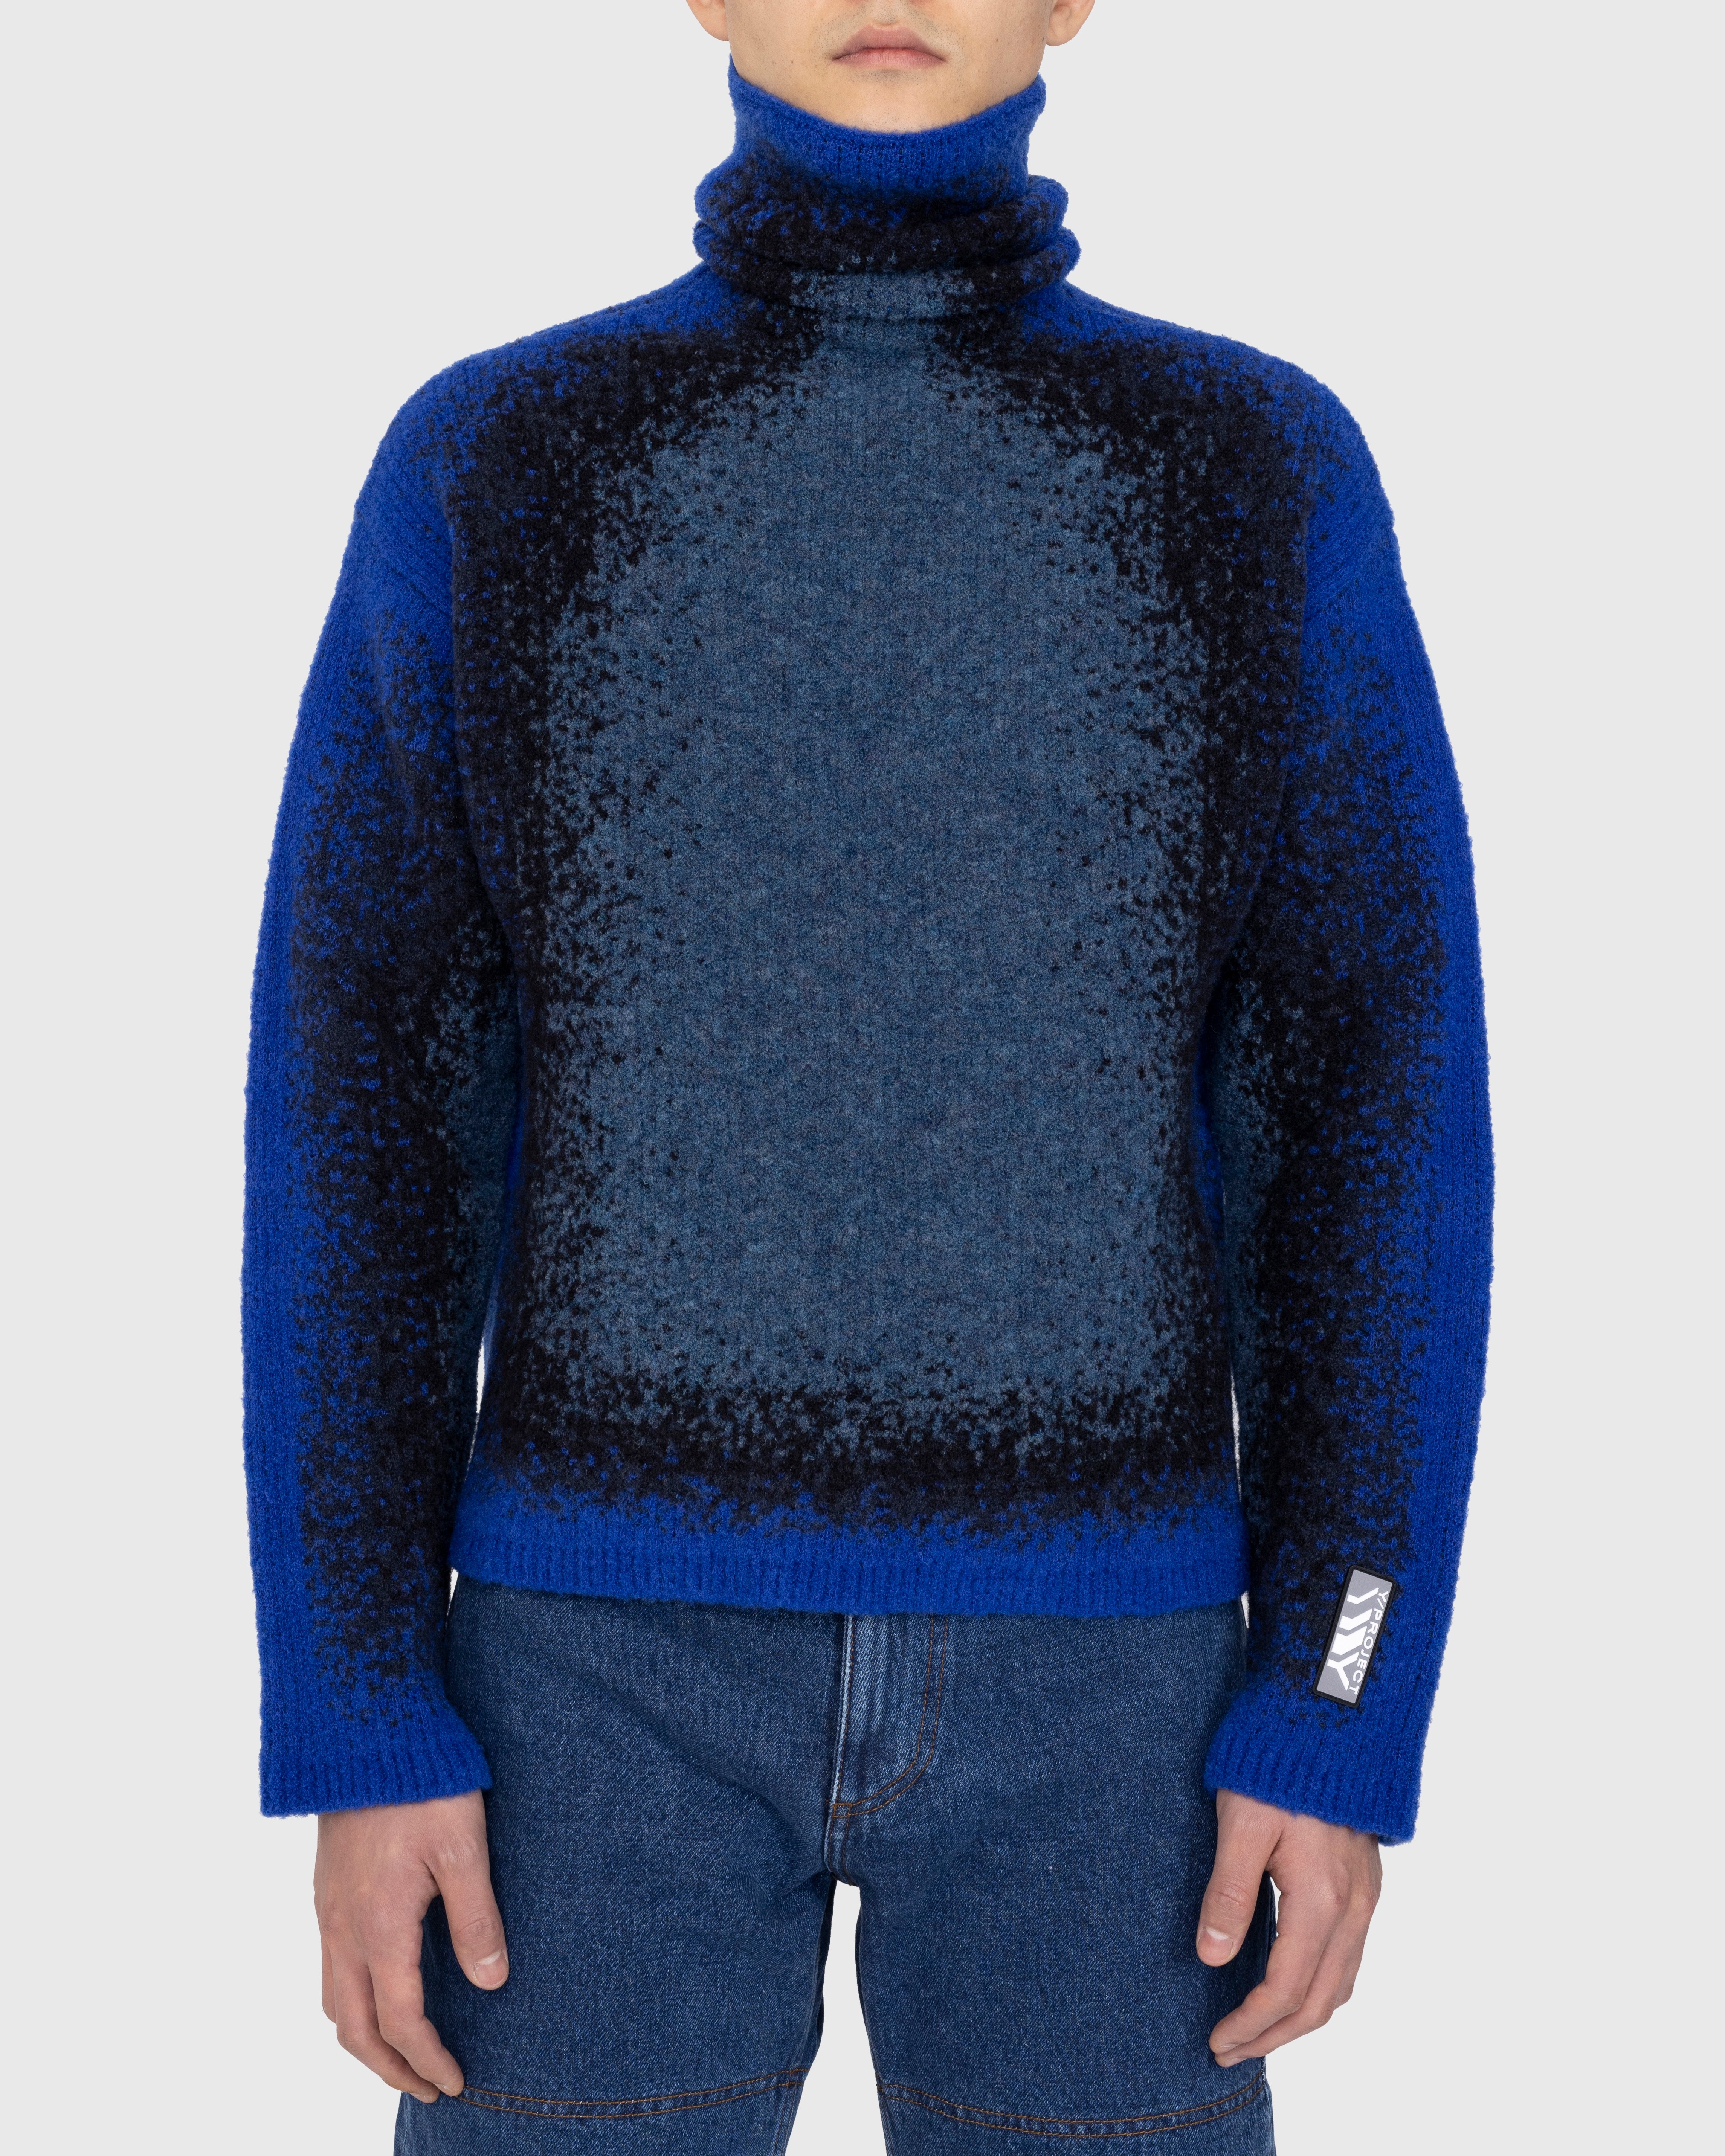 Y/Project - Gradient Heavy Knit Turtleneck Blue - Clothing - Blue - Image 2